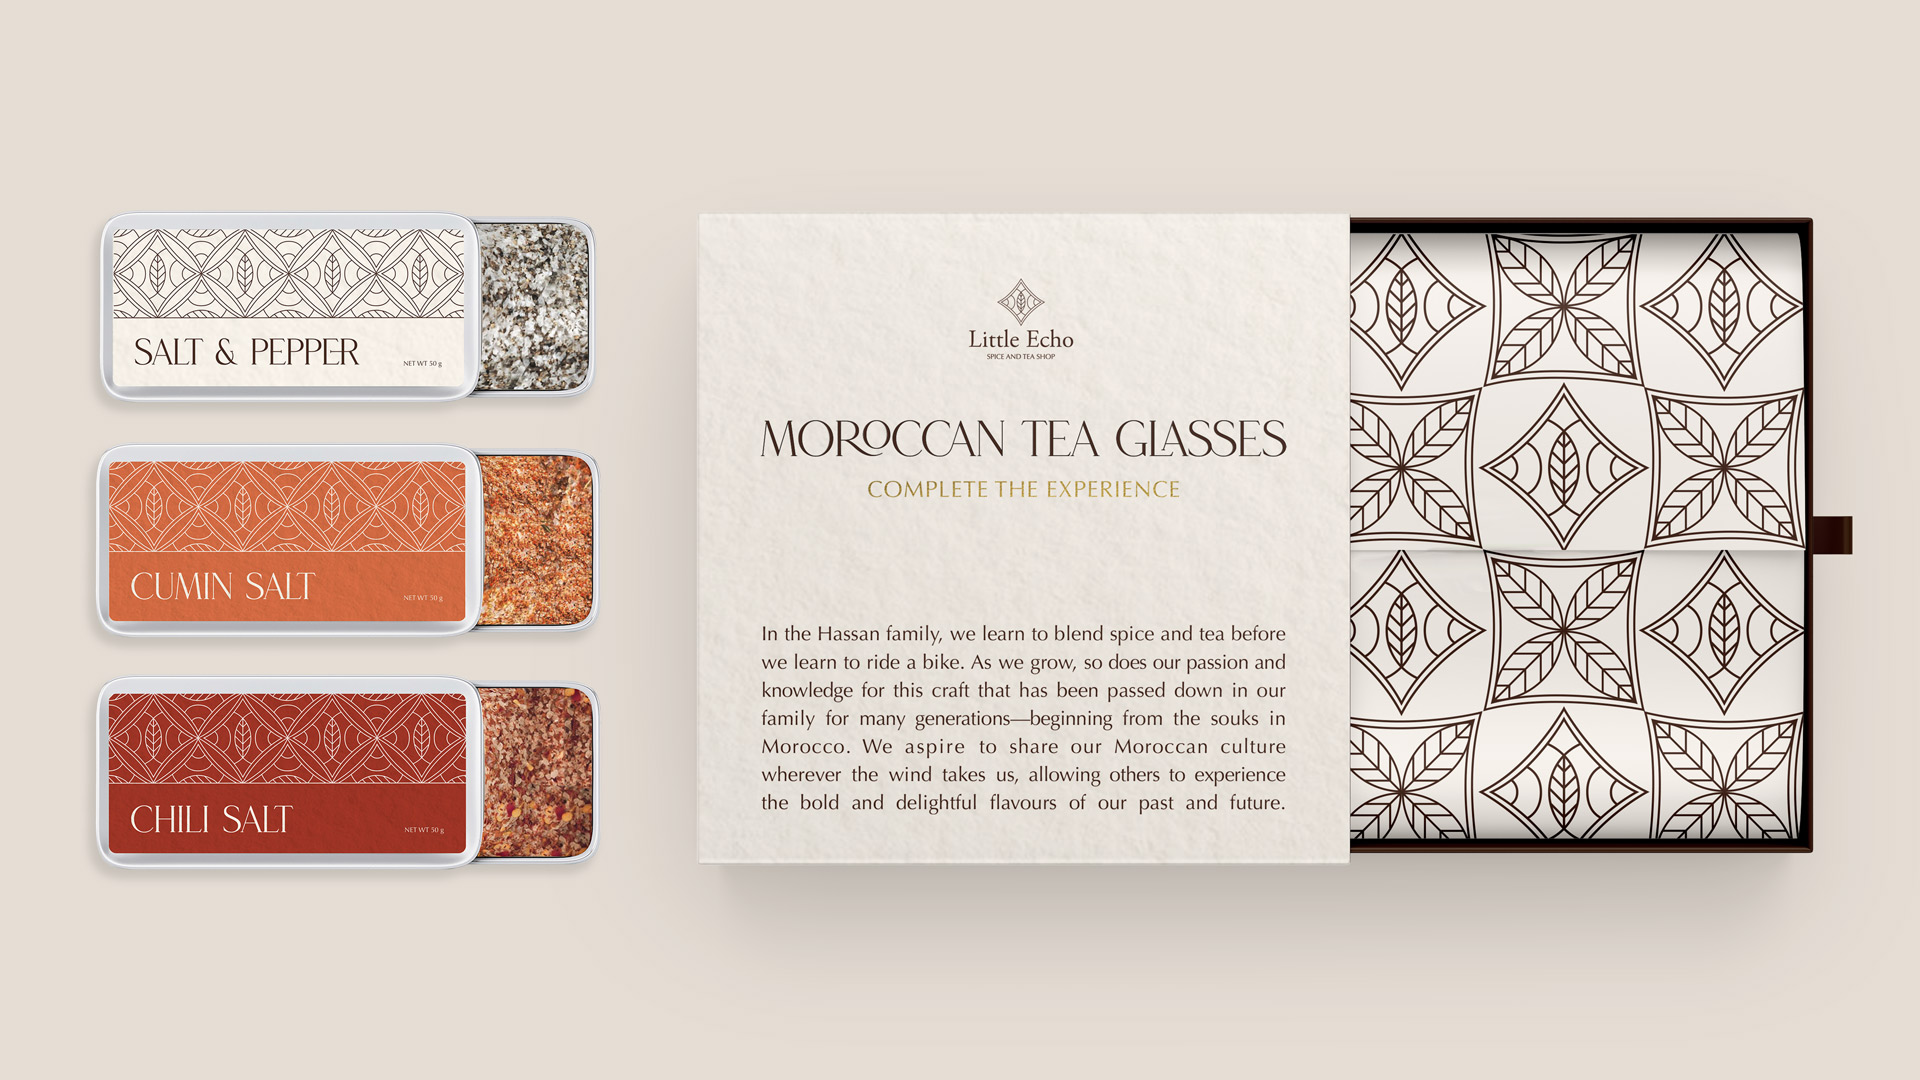 Brand identity including logo design and package design for Little Echo, a Moroccan-inspired spice and tea shop.